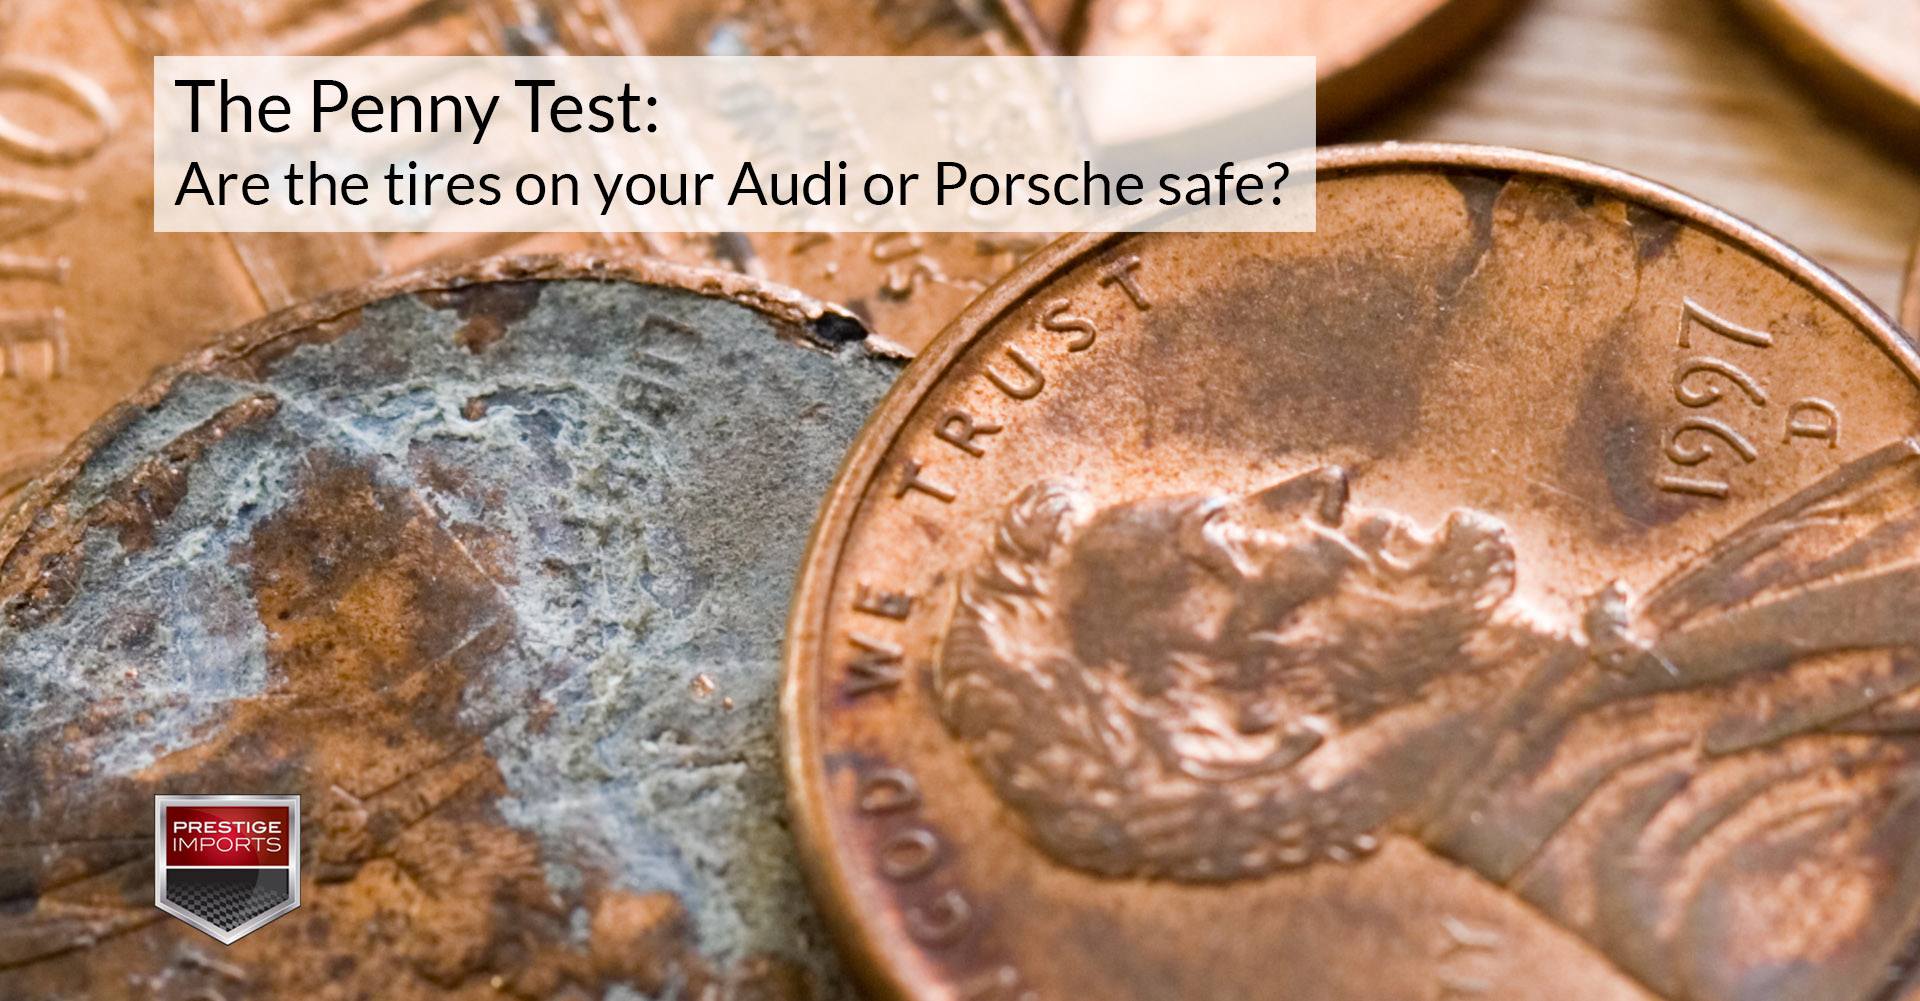 The Penny Test - Are the tires on your Audi or Porsche safe